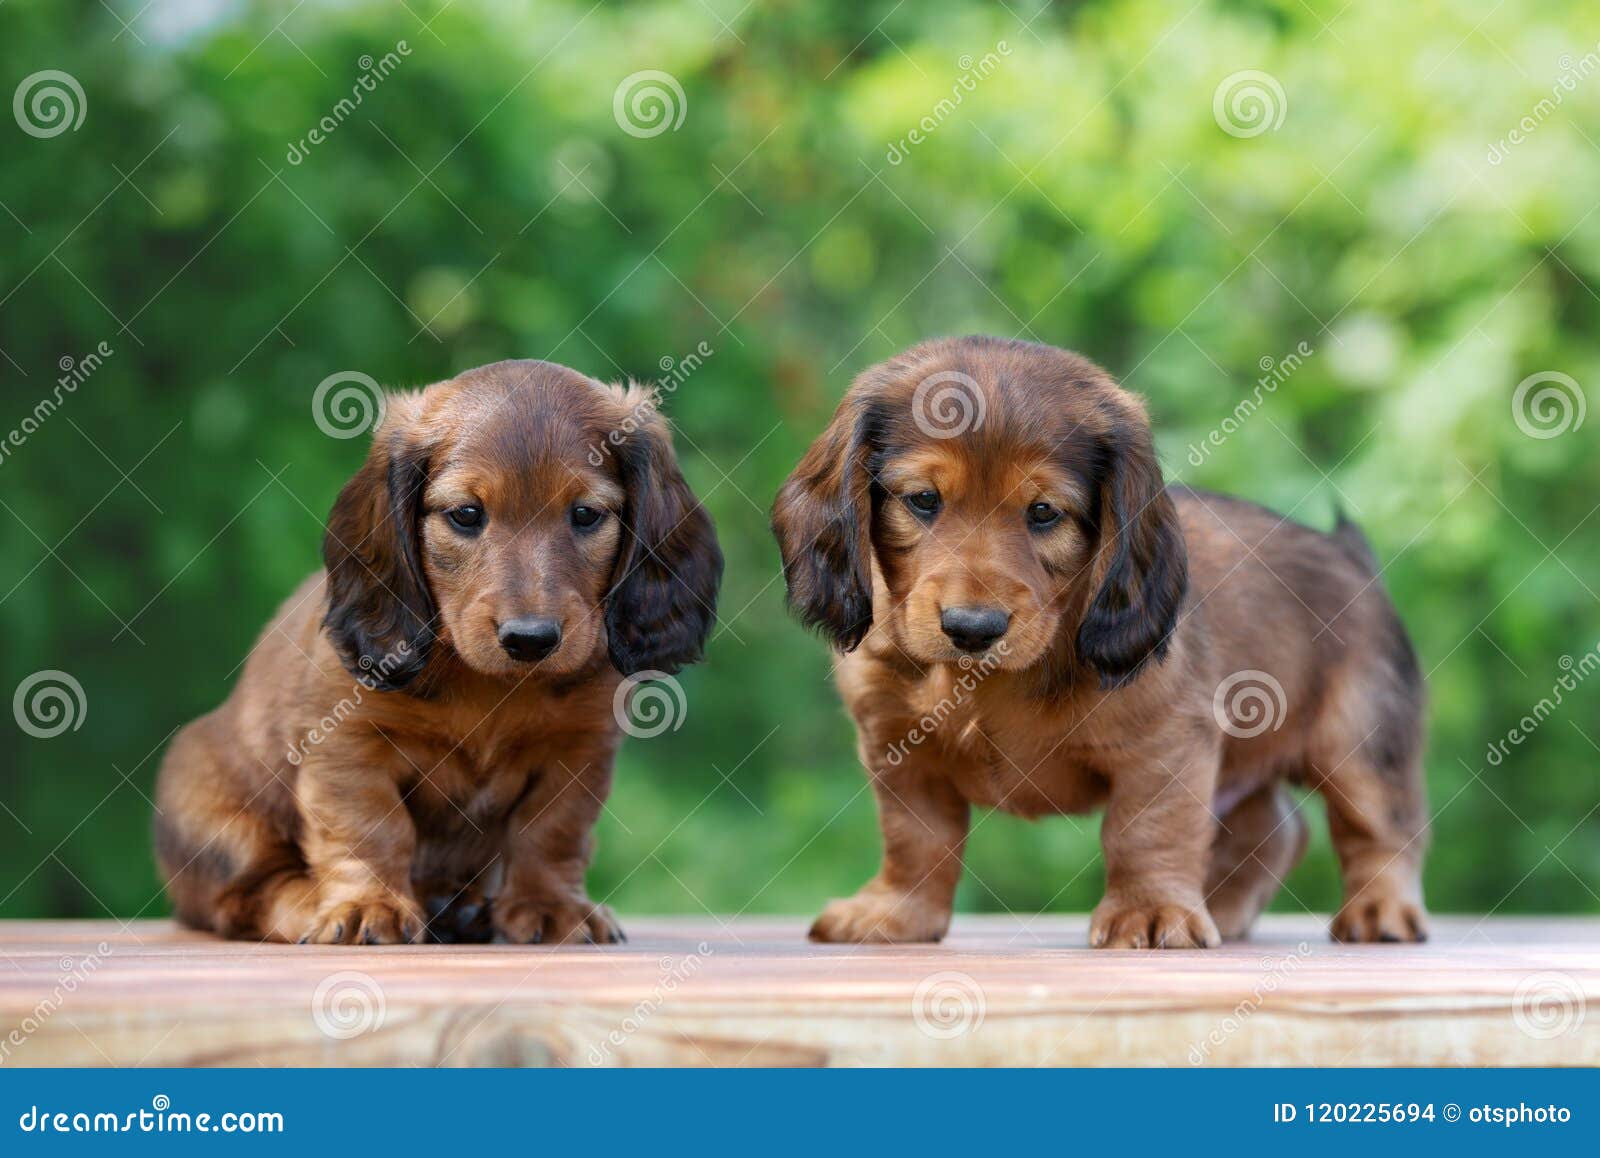 Adorable Dachshund Puppies Outdoors in Summer Stock Photo - Image of  adorable, brown: 120225694